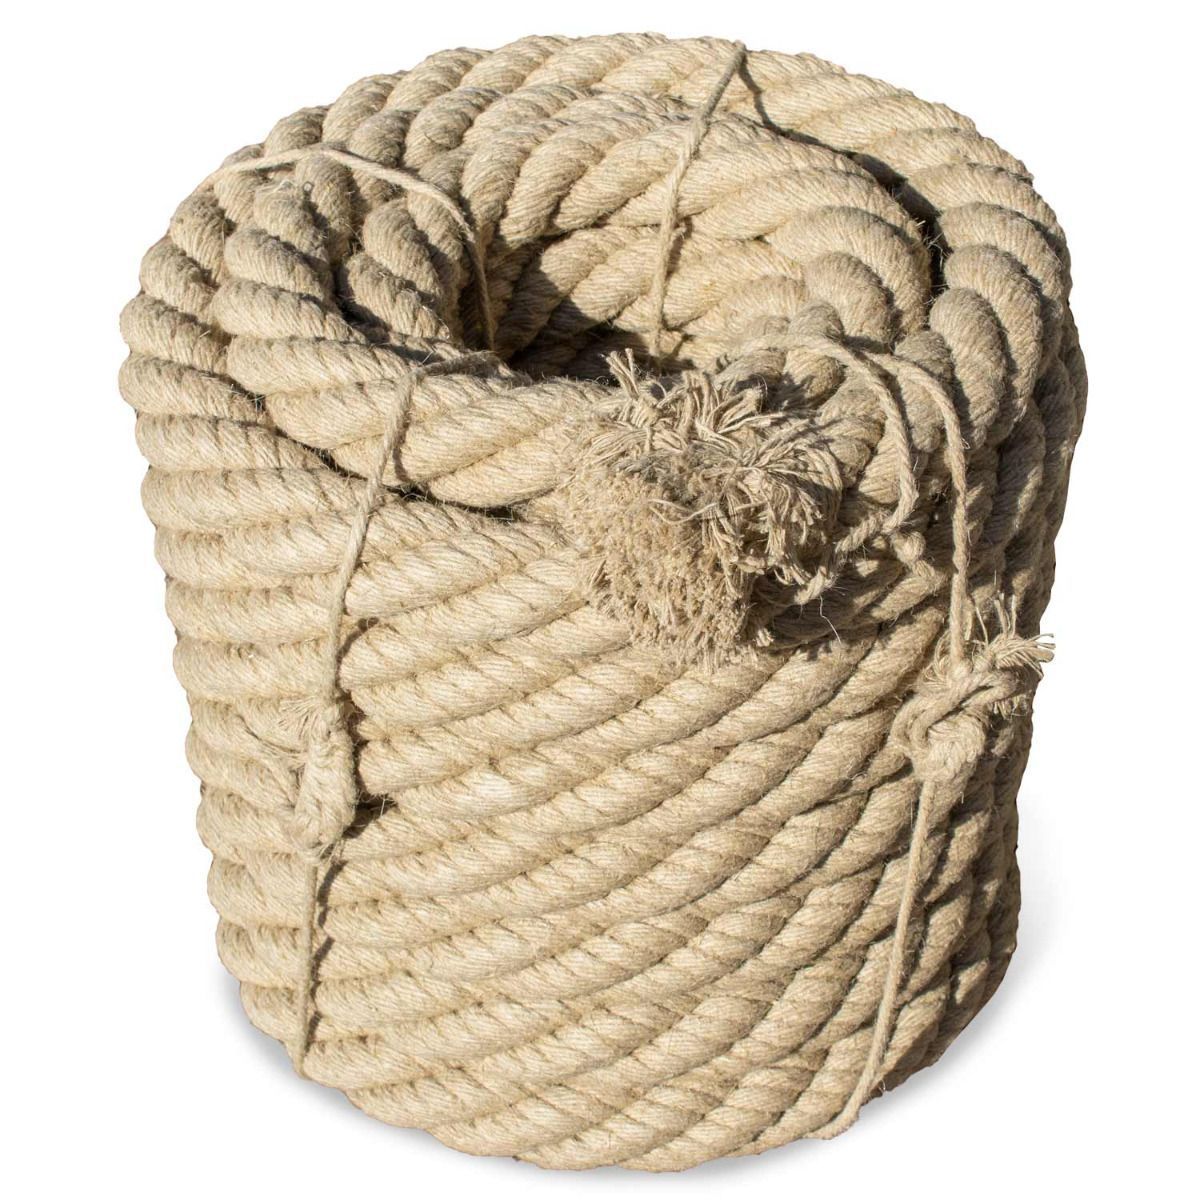 100% Natural Jute Rope Cord Braided Twisted Boating Garden Decking Fitness Gym 